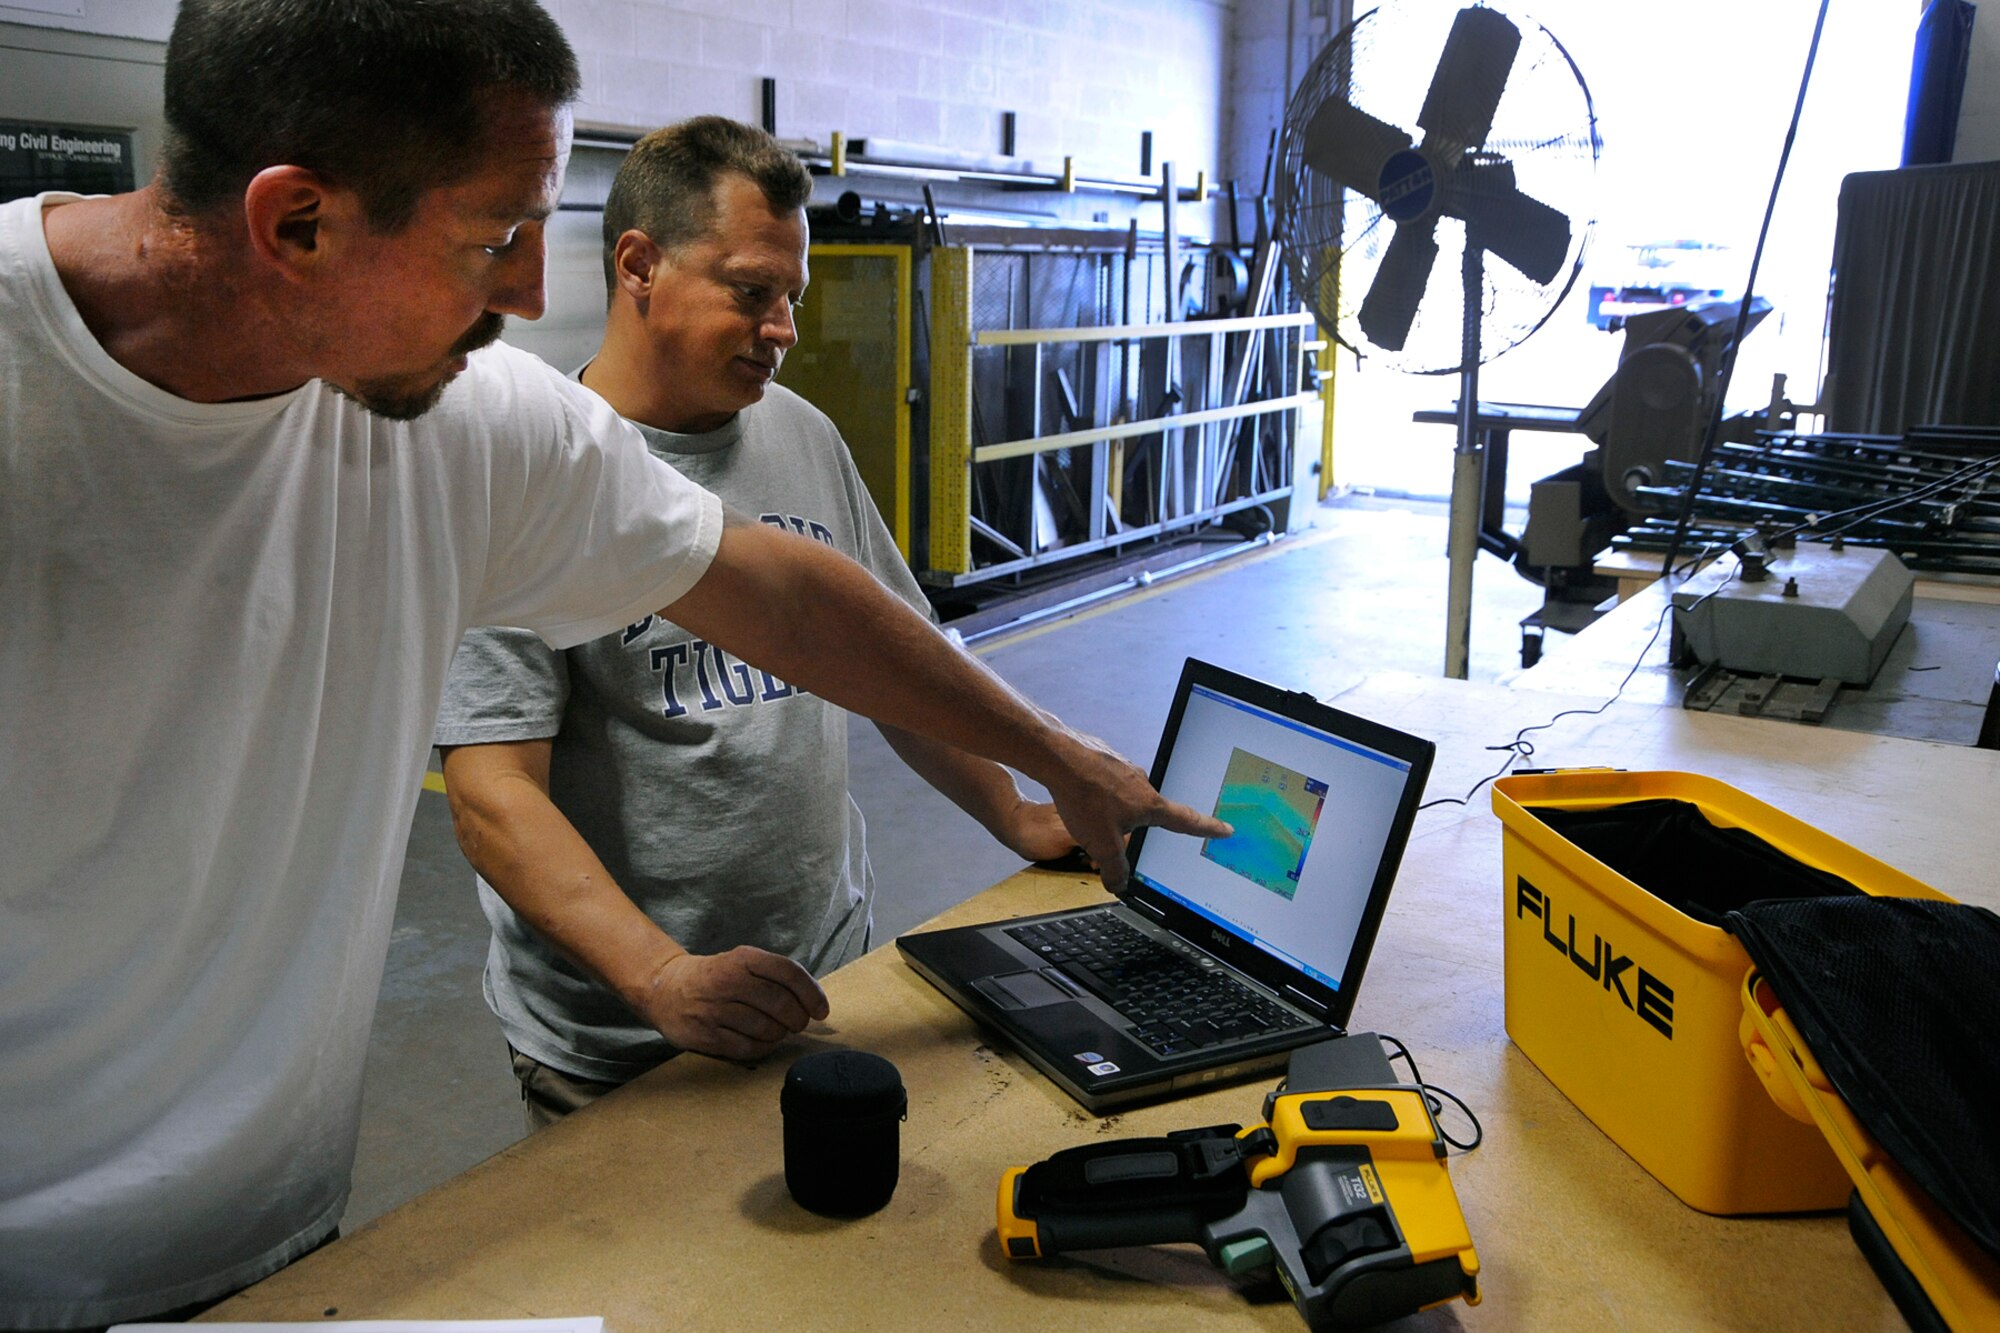 Bruce Zysk, left, and Darren Burton, a roofer and an electrician, respectively, with the 127th Civil Engineer Squadron at Selfridge Air National Guard Base, Mich., describe how they use a thermal imaging camera to develop energy saving techniques at the base. Zysk said by using the camera, he’s able to prioritize roofing repairs to help Air National Guard maximize energy conservation efforts by tackling projects that represent the most heat loss fist. (Air National Guard photo by John S. Swanson)